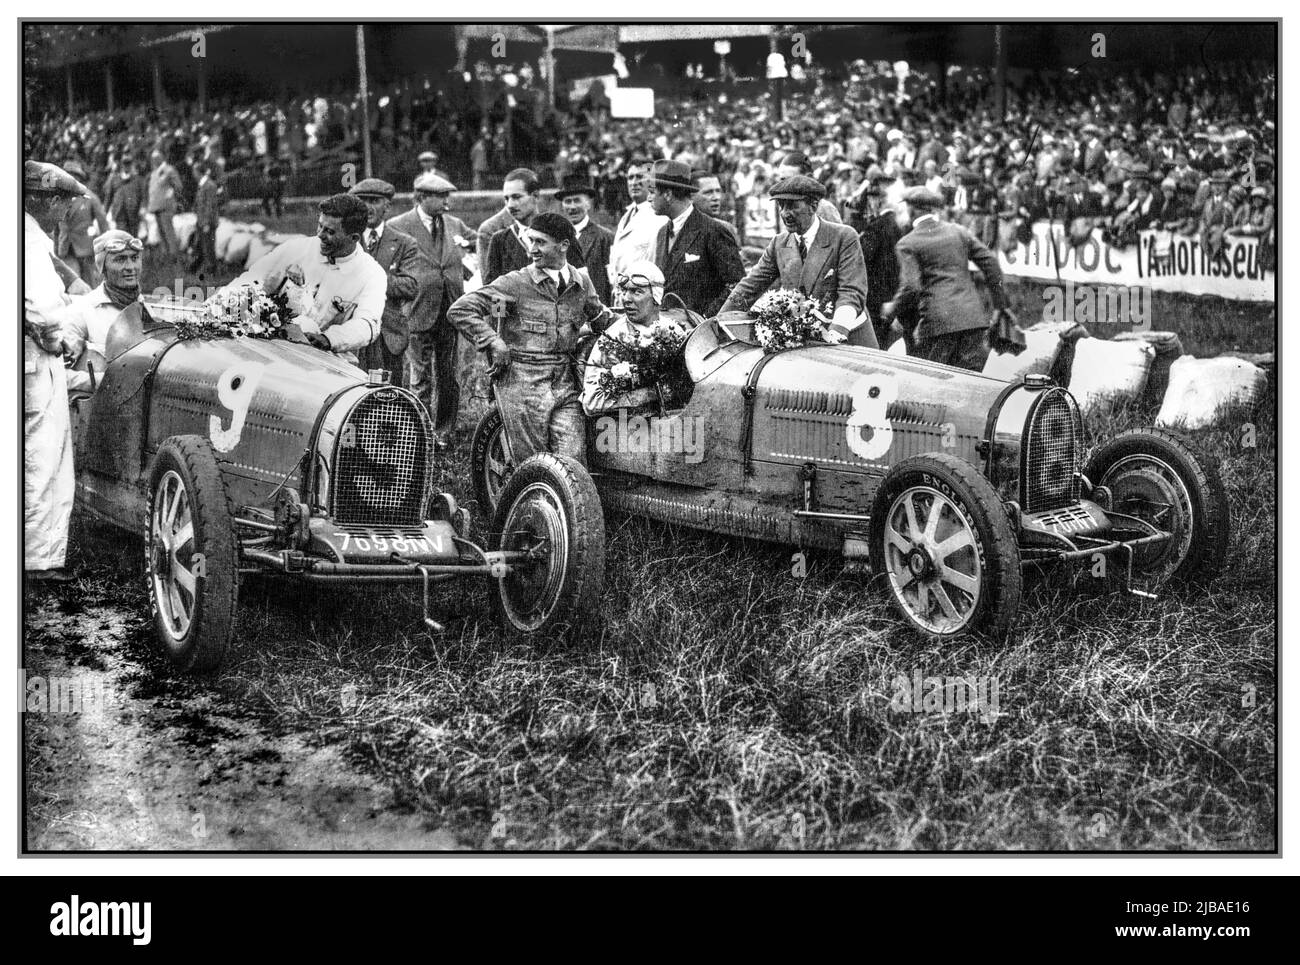 Vintage 1930 Belgian Grand Prix winners (left) Louis Chiron First in number 9 Bugatti and Guy Bouriat Second in car number 8., Race also known as the VII Grand Prix d'Europe was a Grand Prix motor race held at Spa-Francorchamps on 20 July 1930. The race was held over 40 laps of a 14.914 km circuit for a total race distance of 596.560 km and was won by Louis Chiron driving a Bugatti. Stock Photo